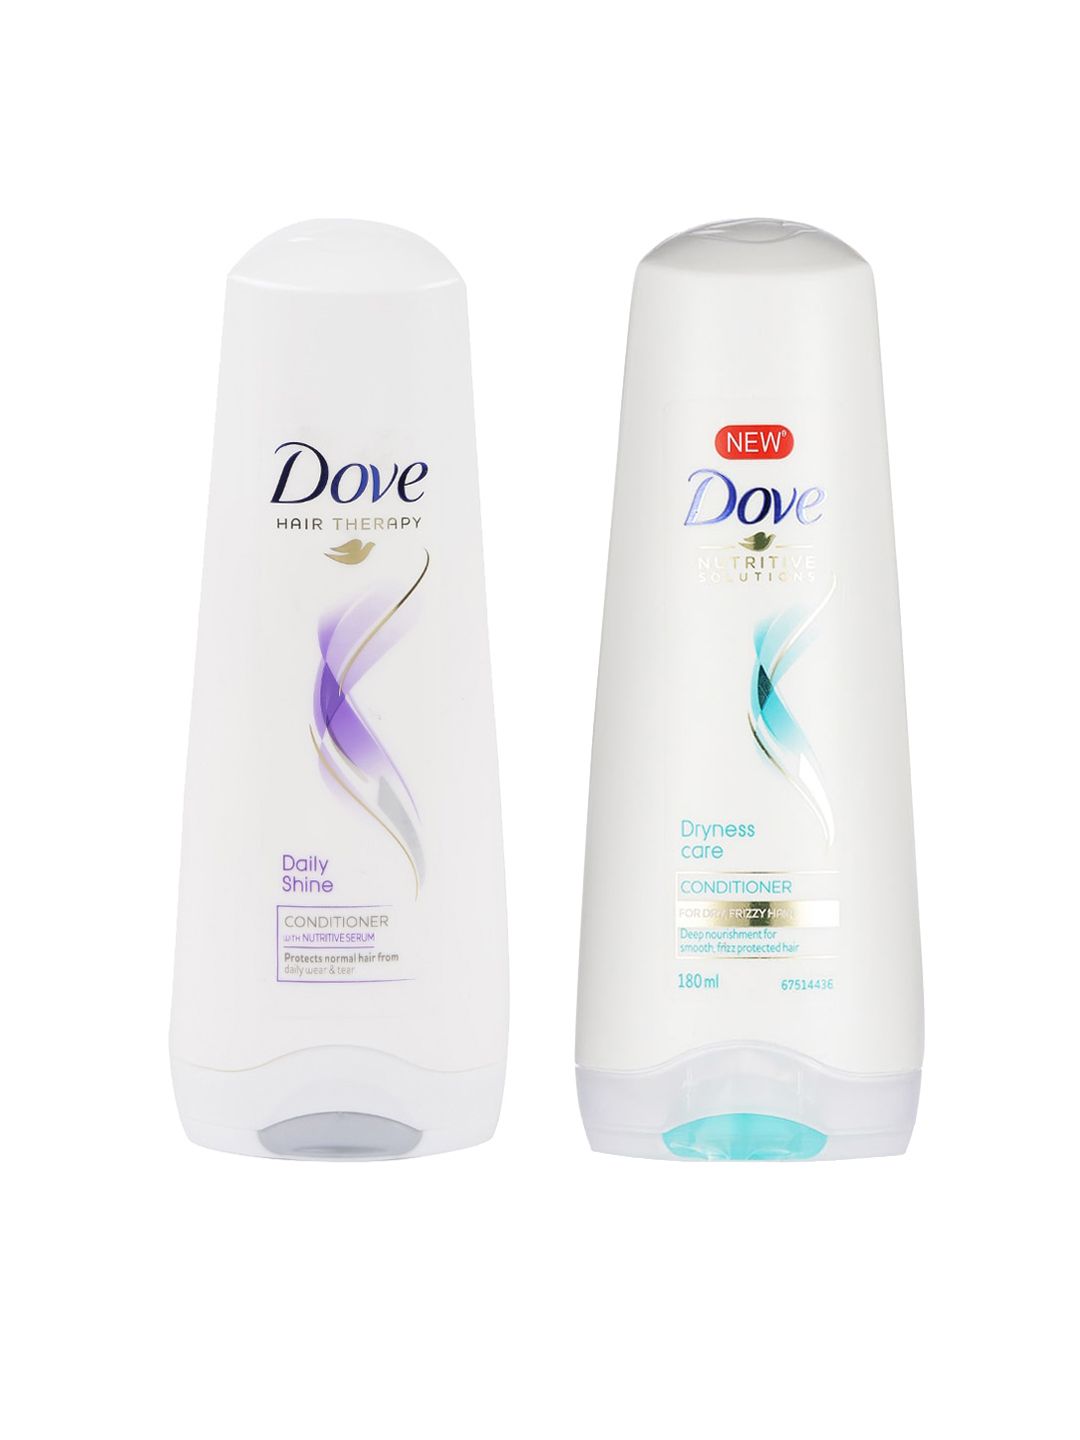 Dove Hair Solutions Daily Shine Conditioner & Hair  Solutions Dryness Care Conditioner Price in India